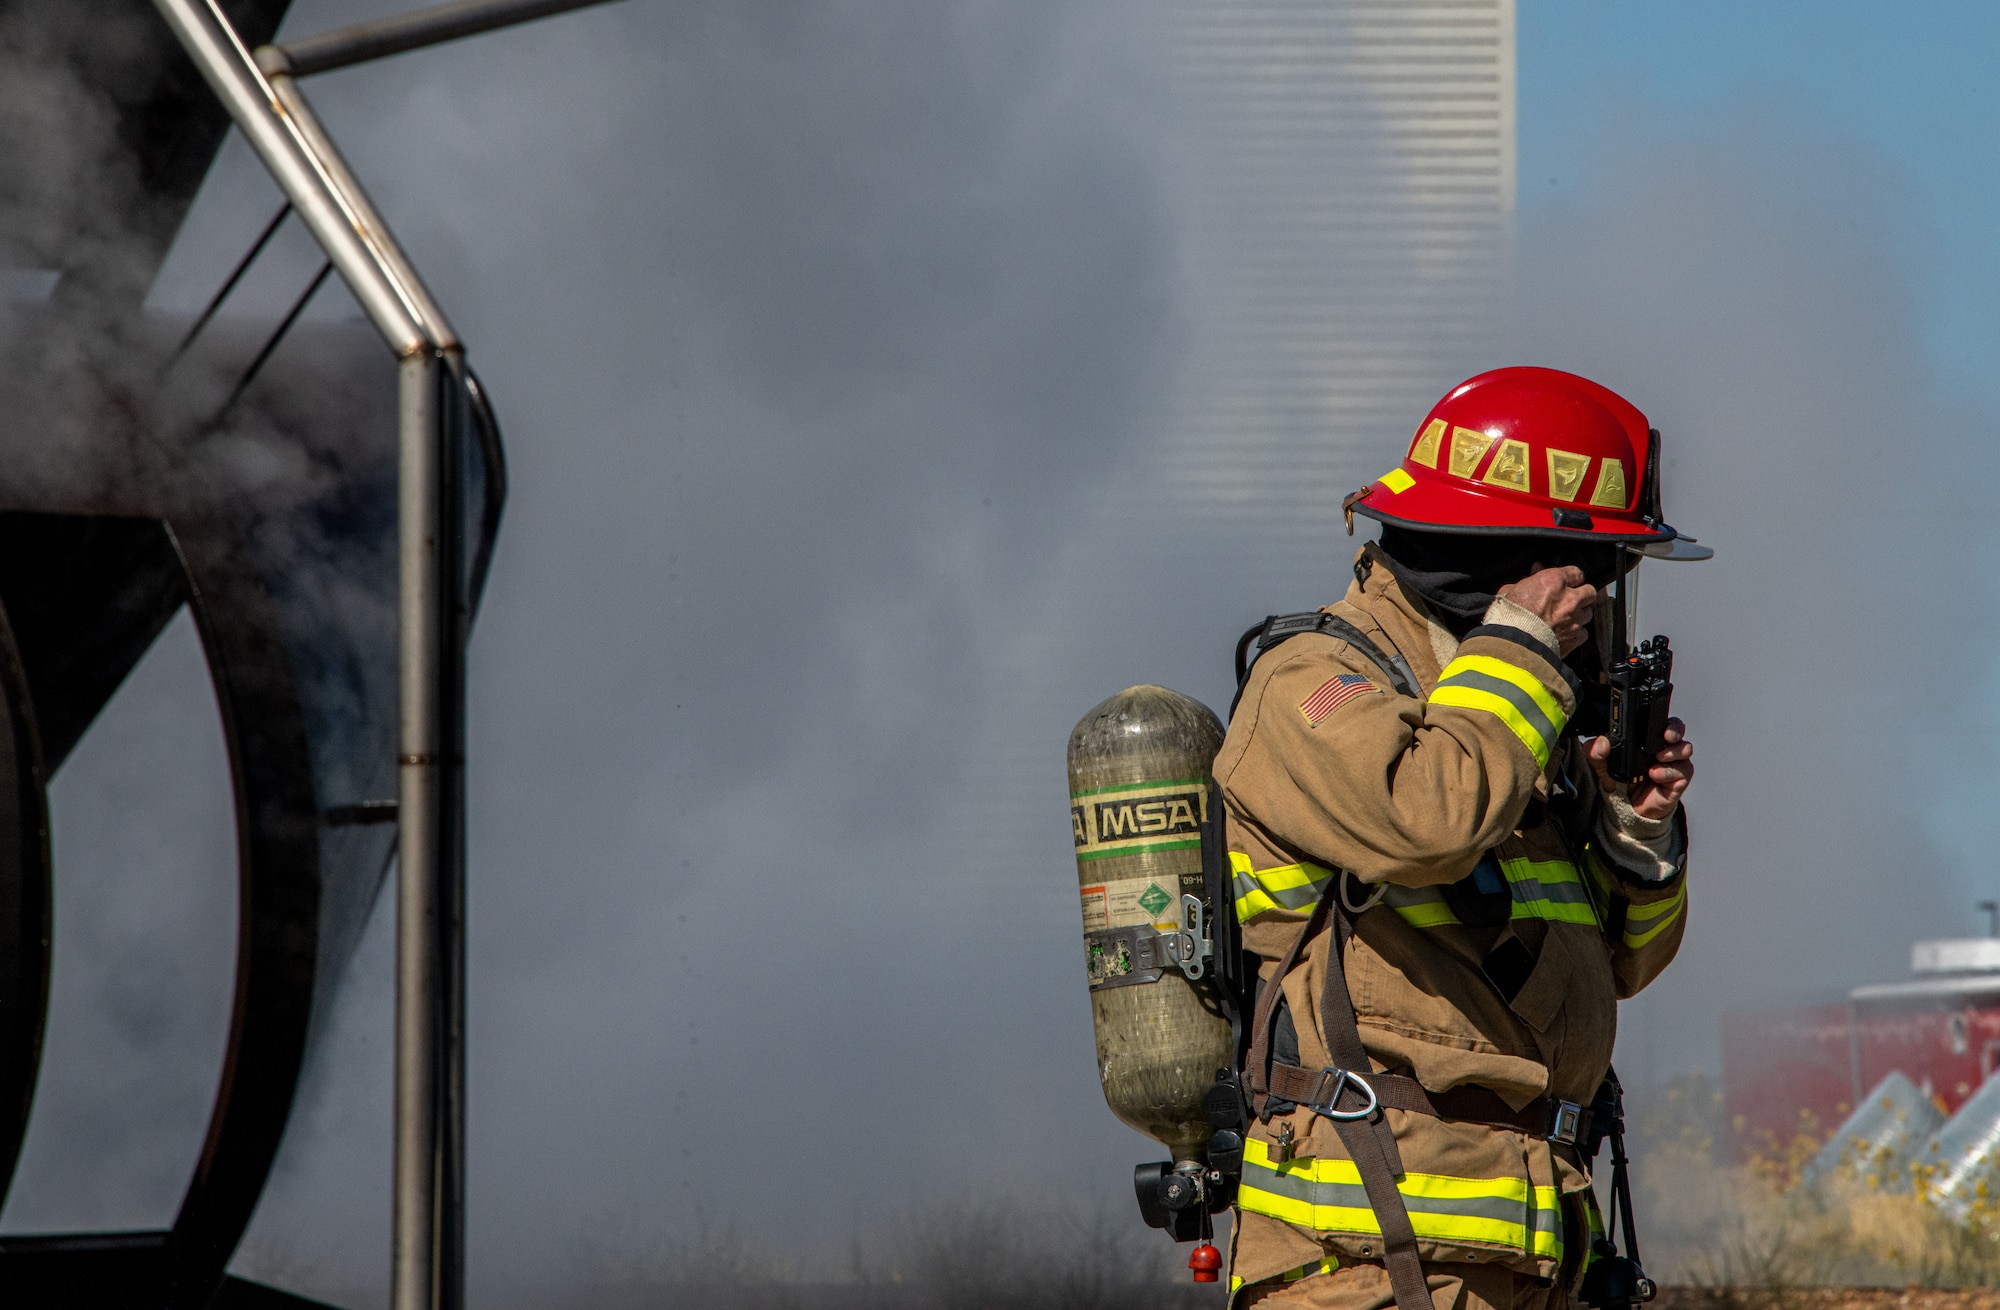 U.S. Air Force Tech. Sgt. Wyatt Matthews, firefighter in the 419th Civil Engineer Squadron, reaches out to fellow firefighters during a readiness training exercise